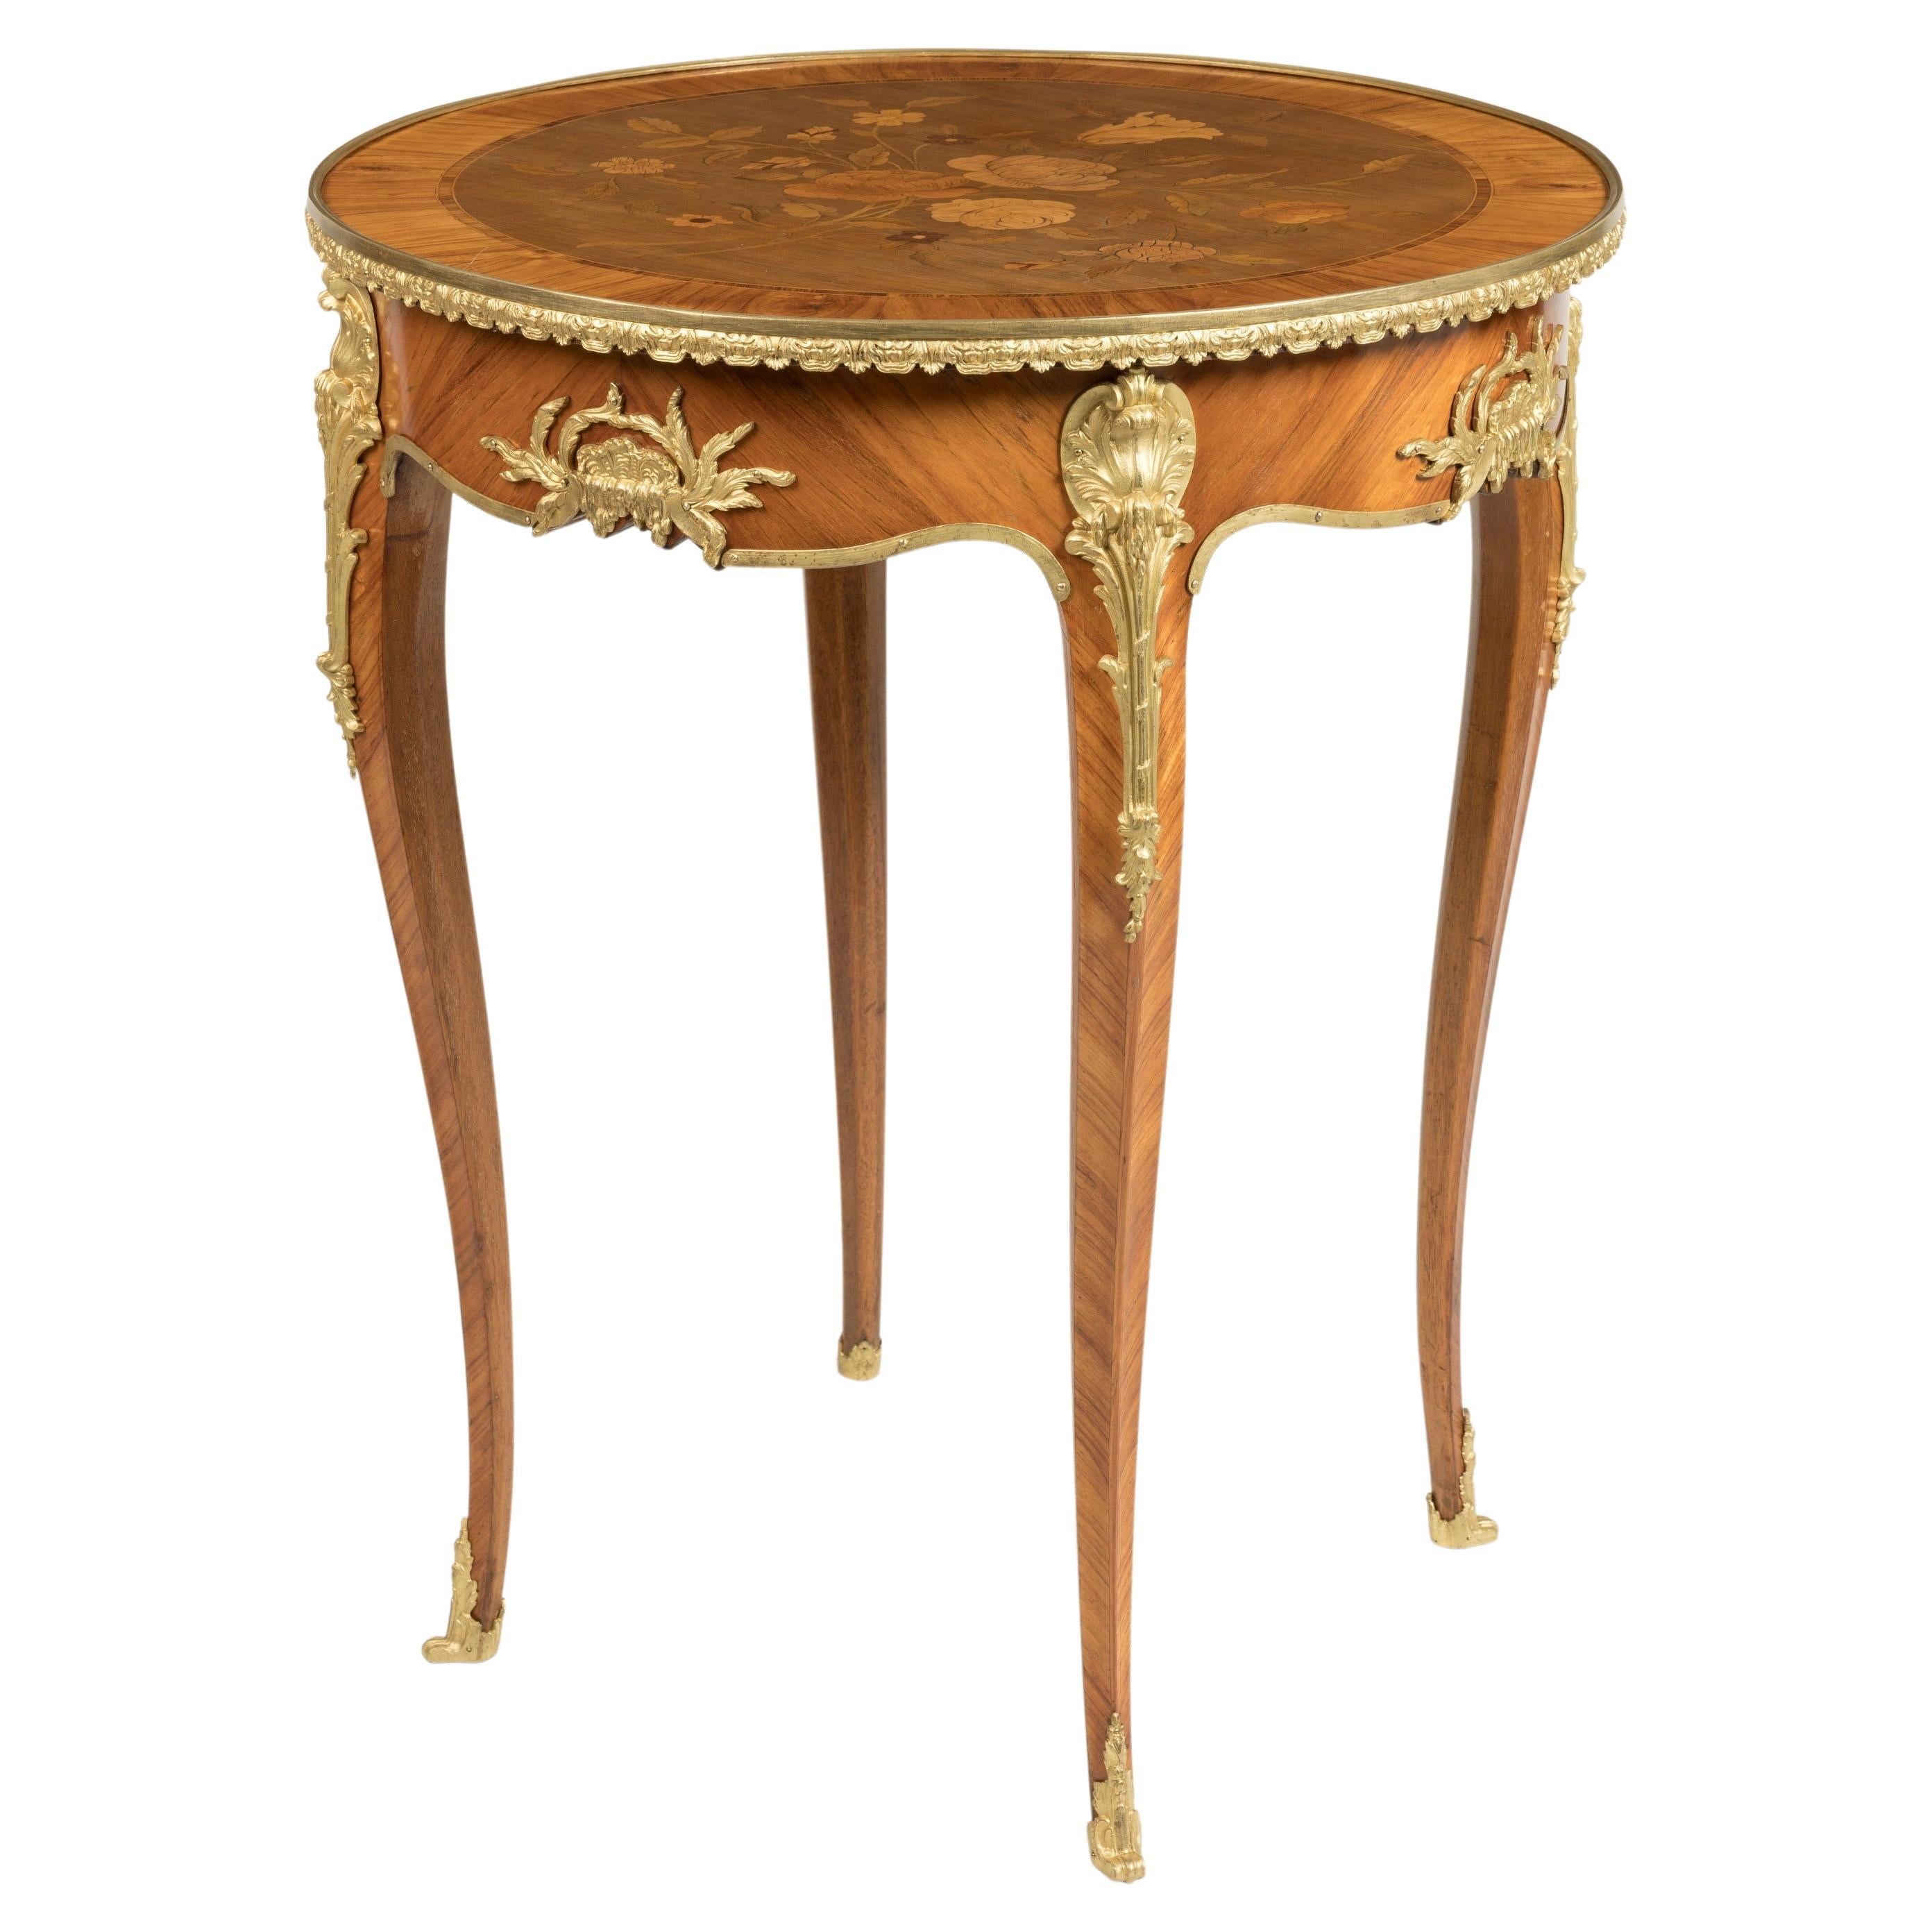 19th Century Marquetry Inlaid & Ormolu Table attributed to François Linke For Sale